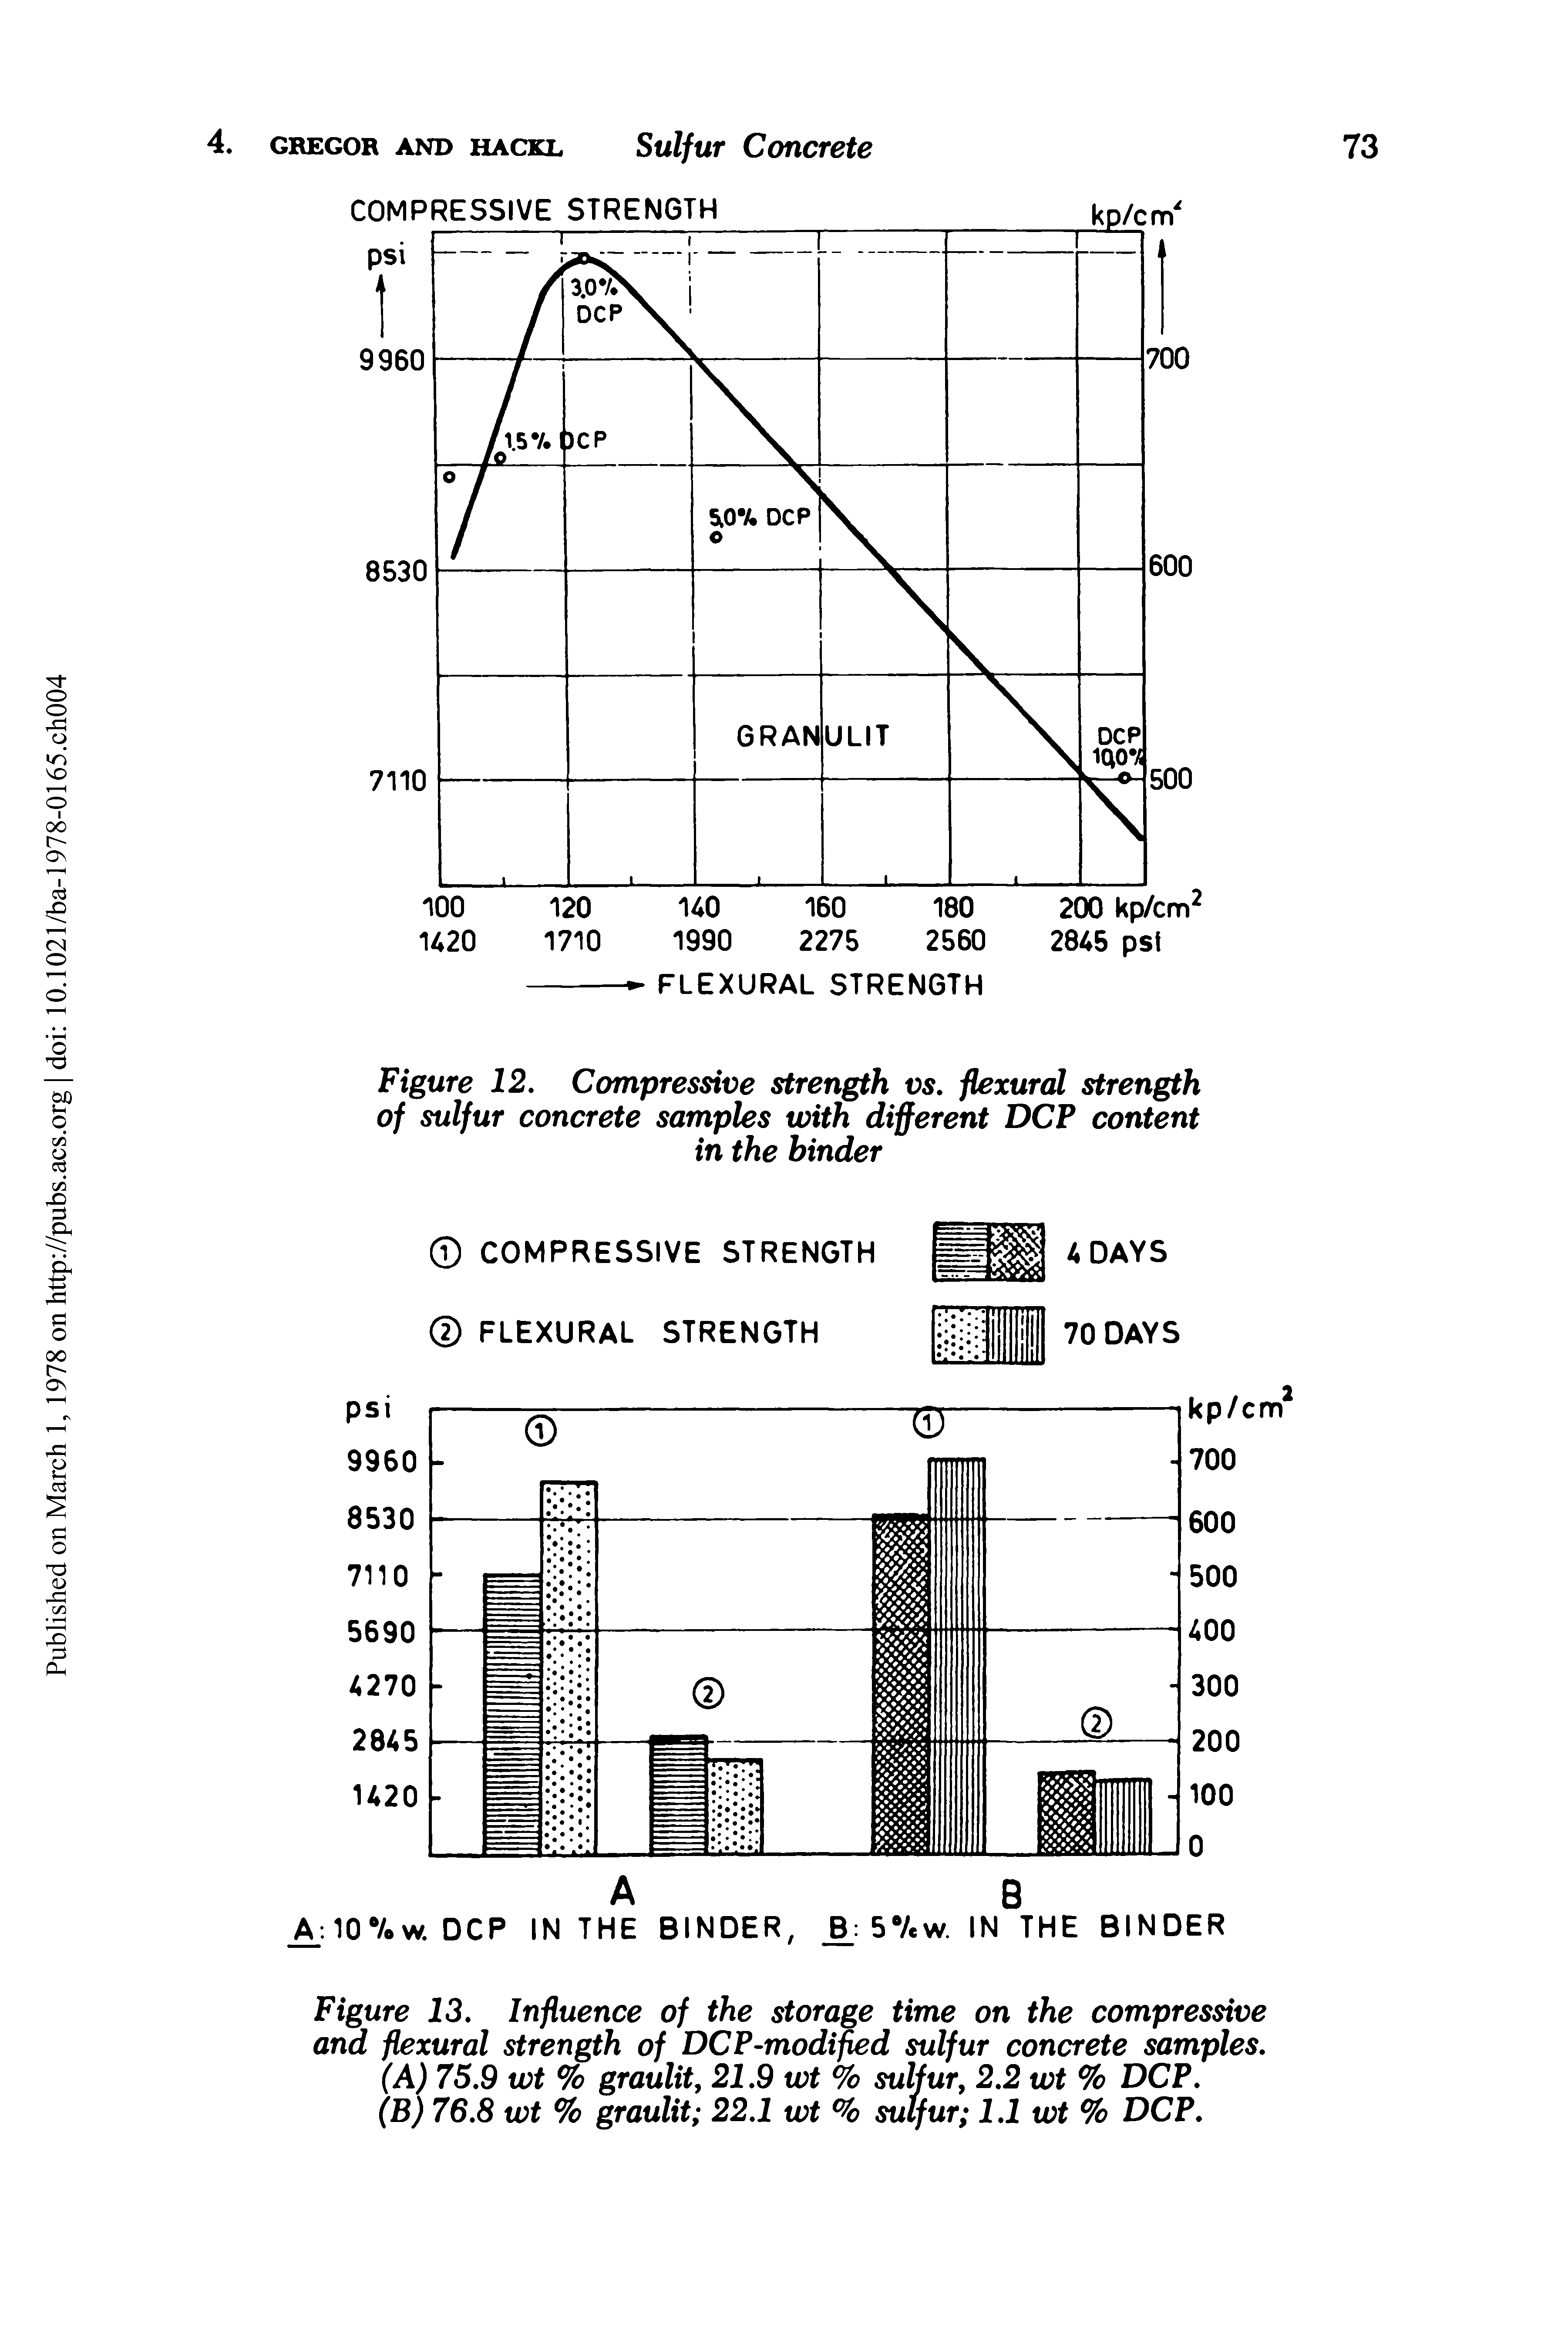 Figure 13. Influence of the storage time on the compressive and flexural strength of DCP-modifled sulfur concrete samples.